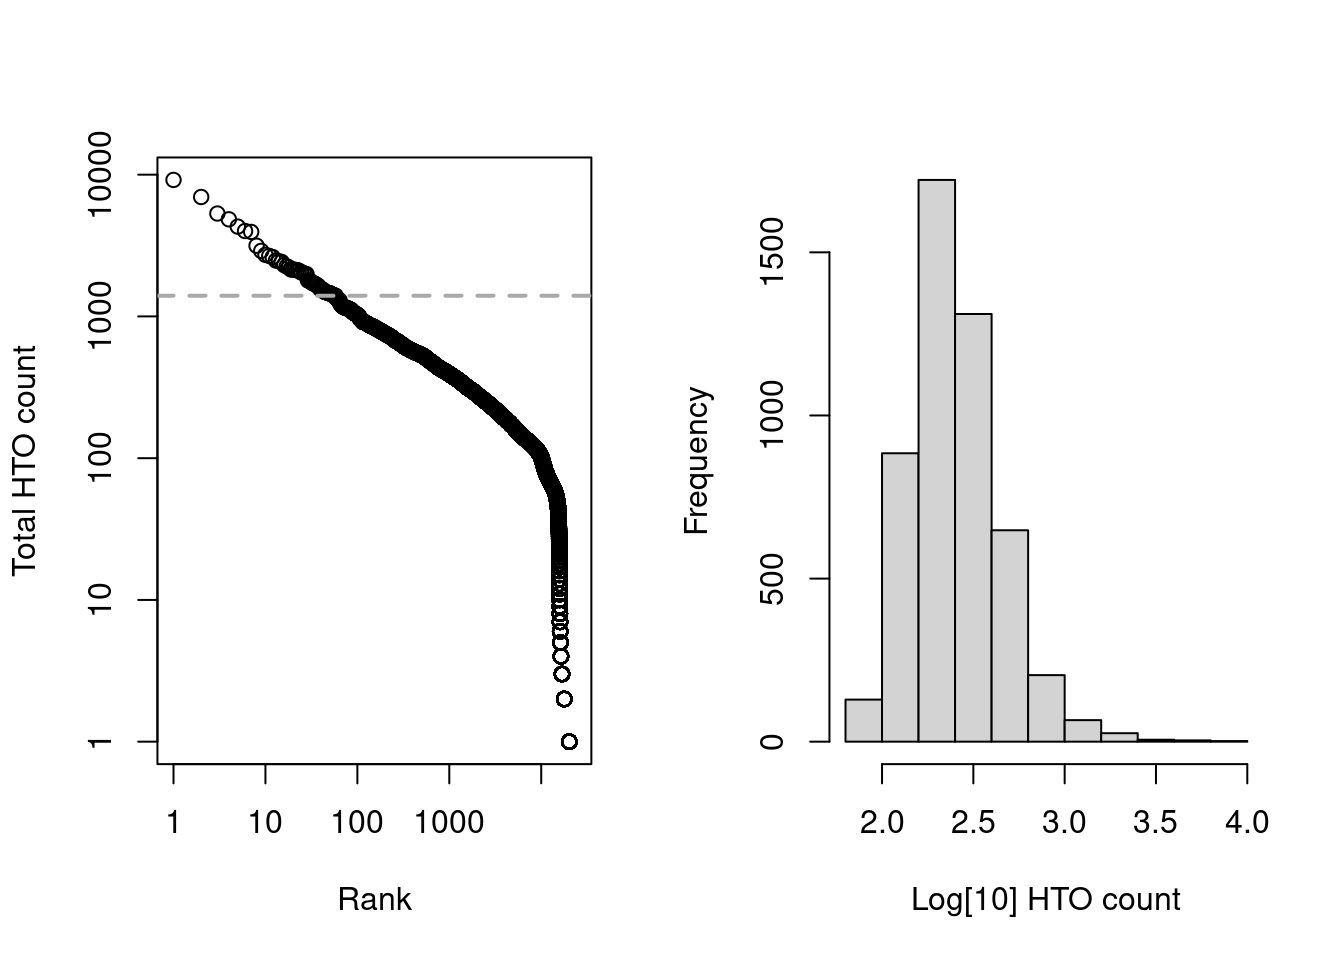 Cell-calling statistics from running `emptyDrops()` on the HTO counts in the cell line mixture data. Left: Barcode rank plot with the knee point shown in grey. Right: distribution of log-total counts for libraries identified as cells.